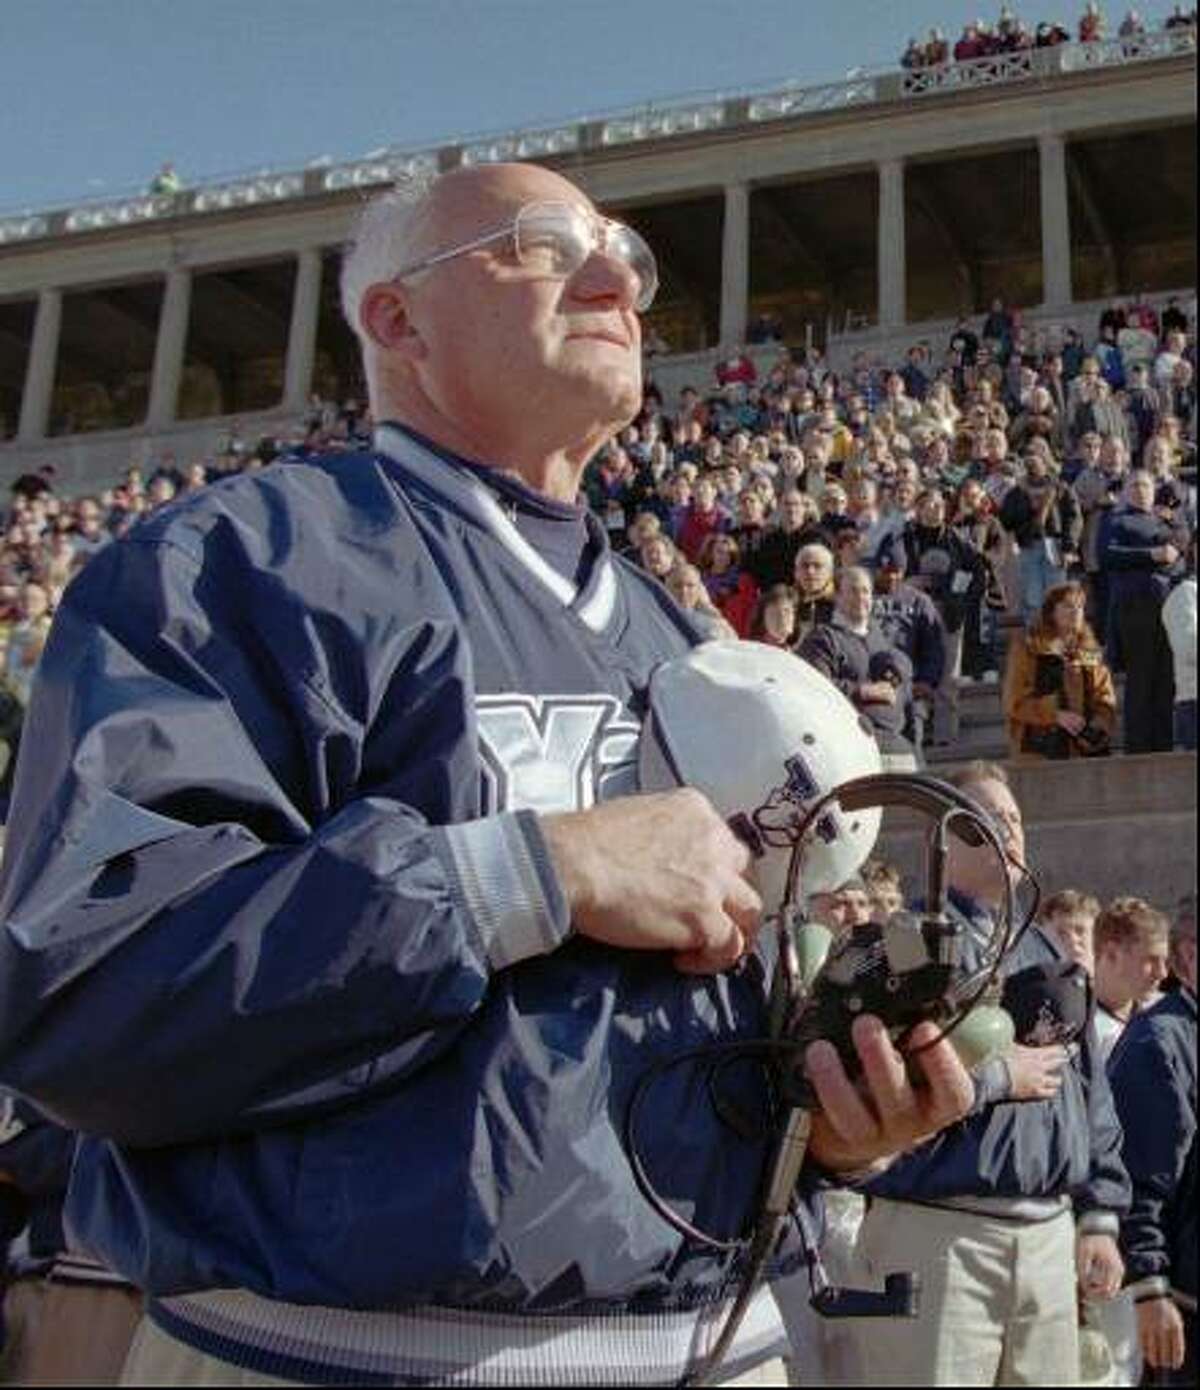 Yale's legendary Hall of Fame football coach Carm Cozza has died. He was 87.